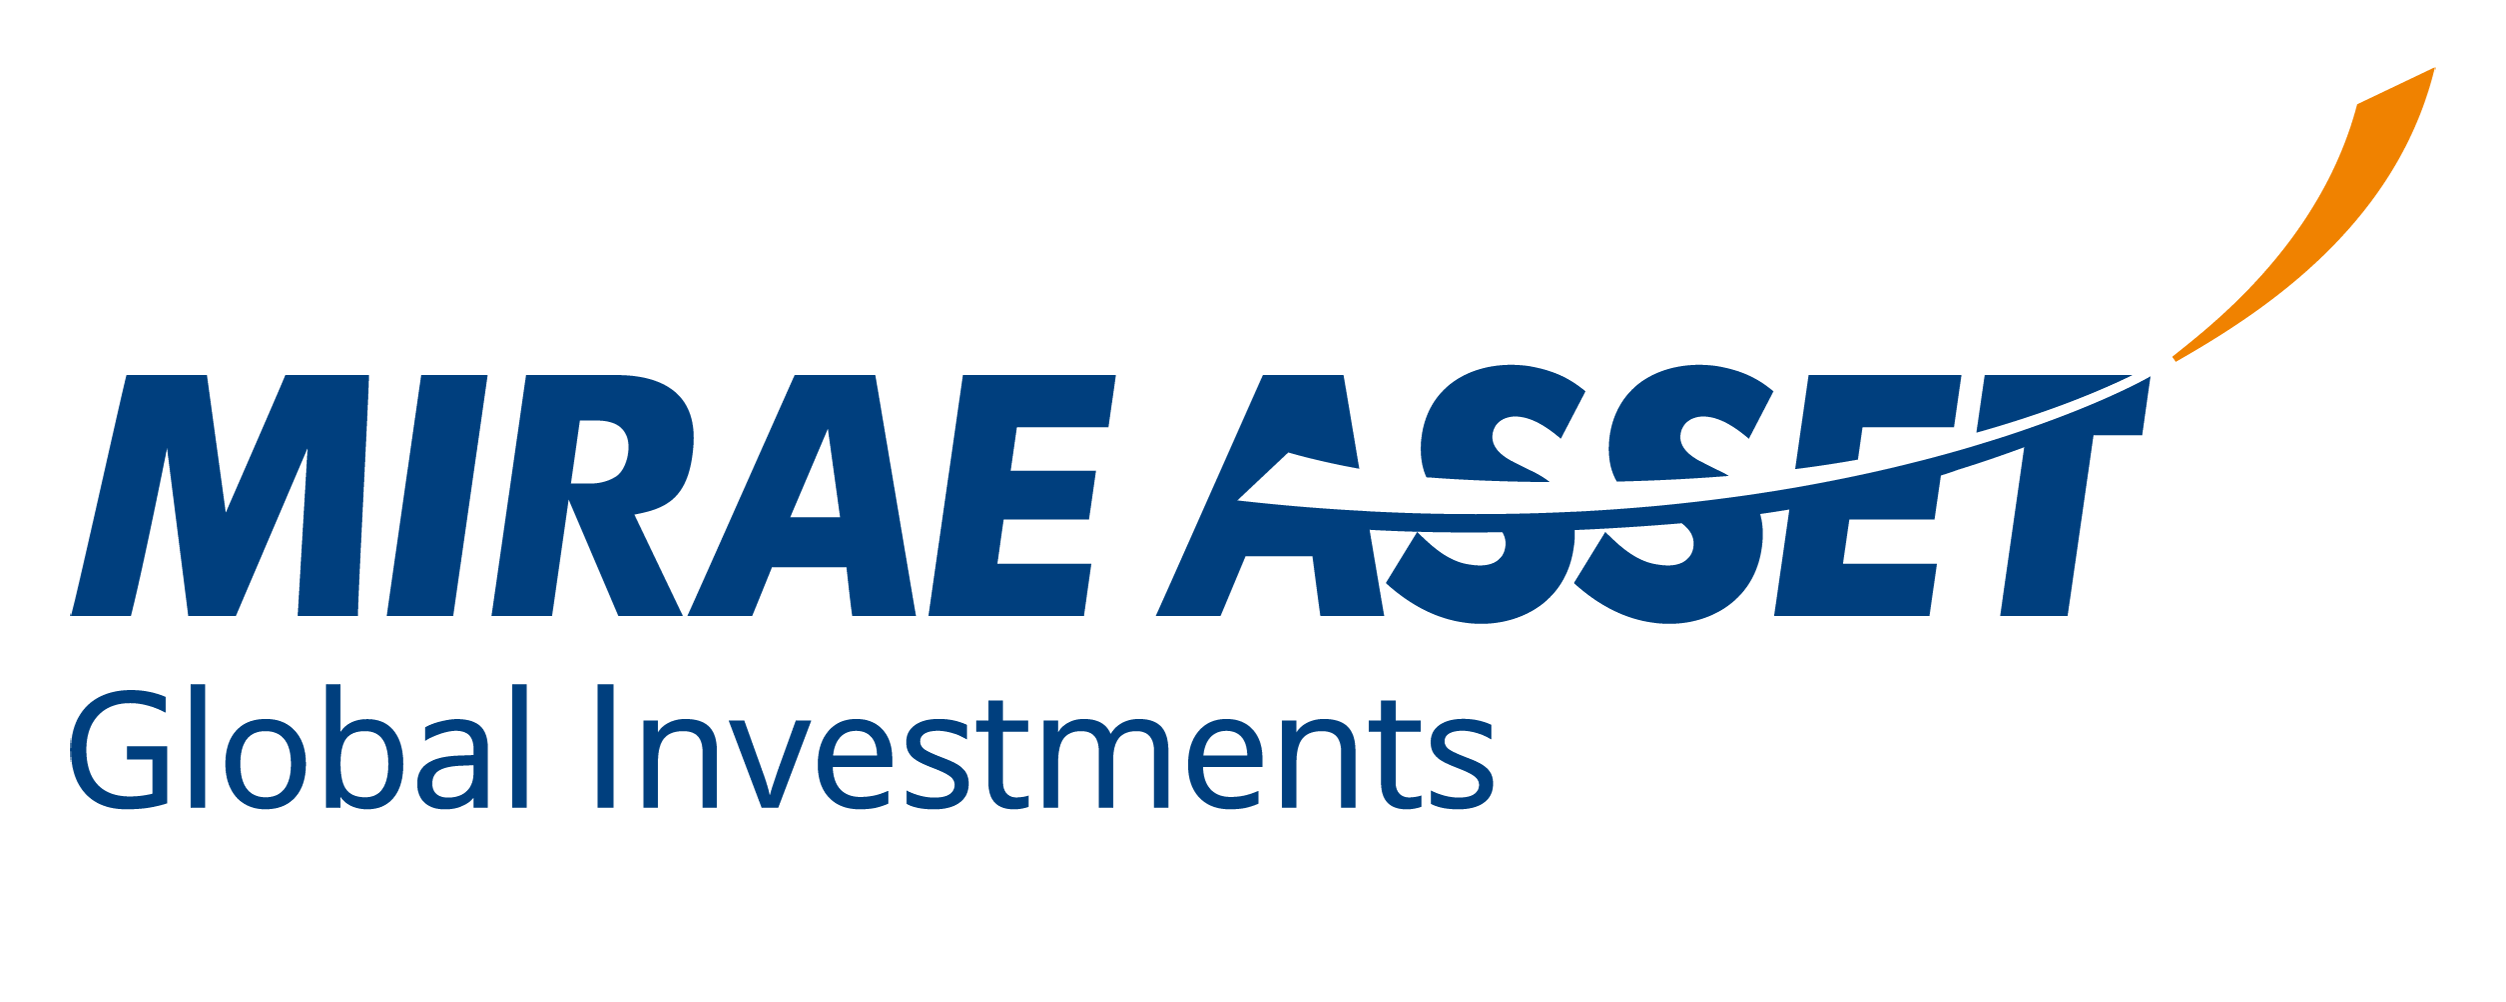 Mirae Asset Global Investments_full color.png